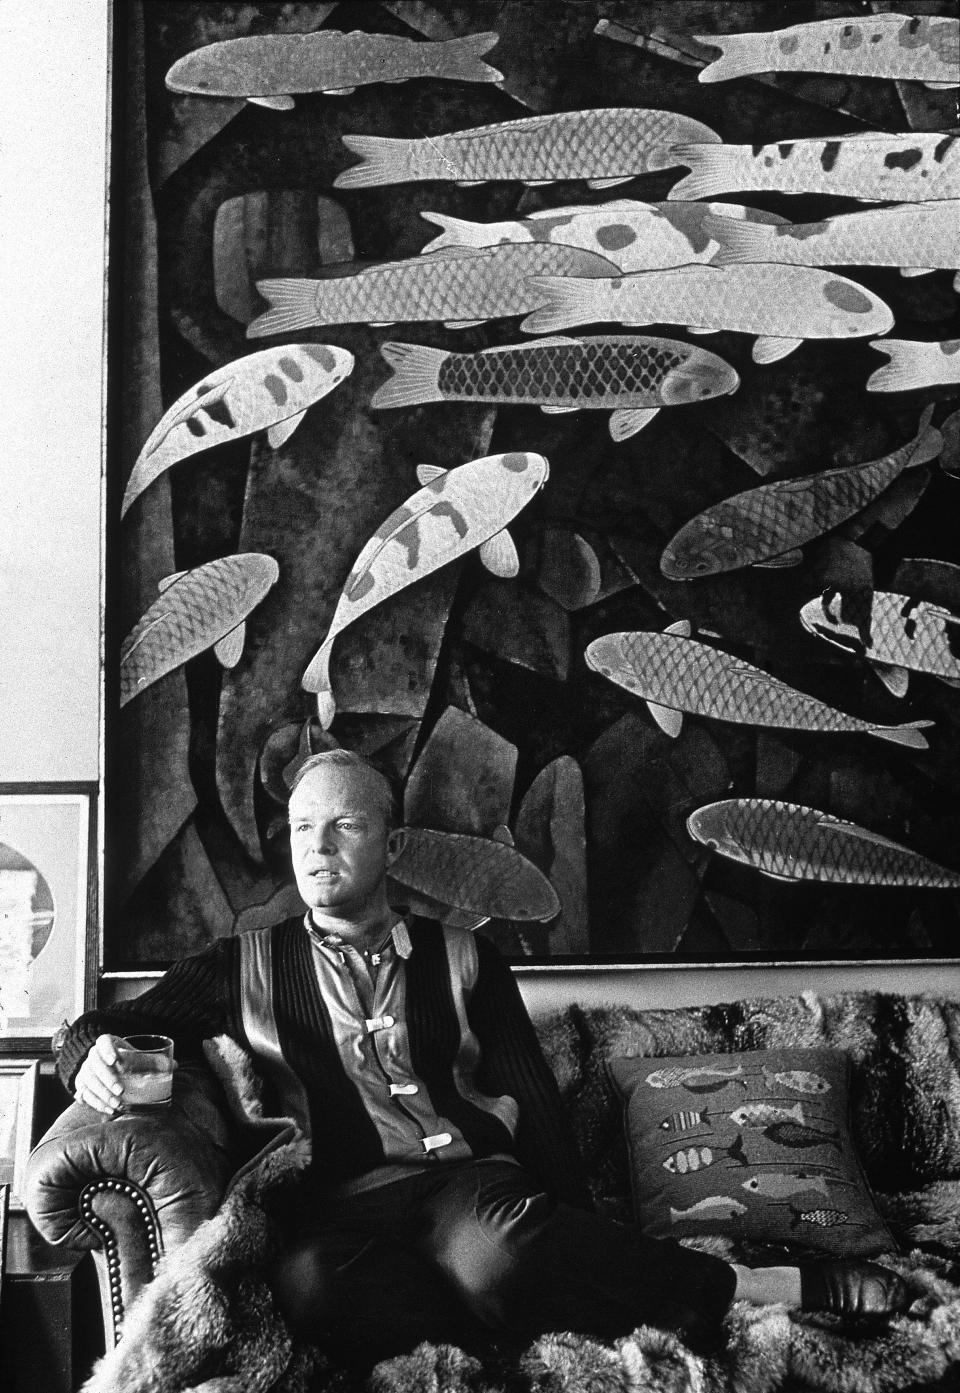 Truman Capote at a house in Palm Springs, California, March 3, 1970.